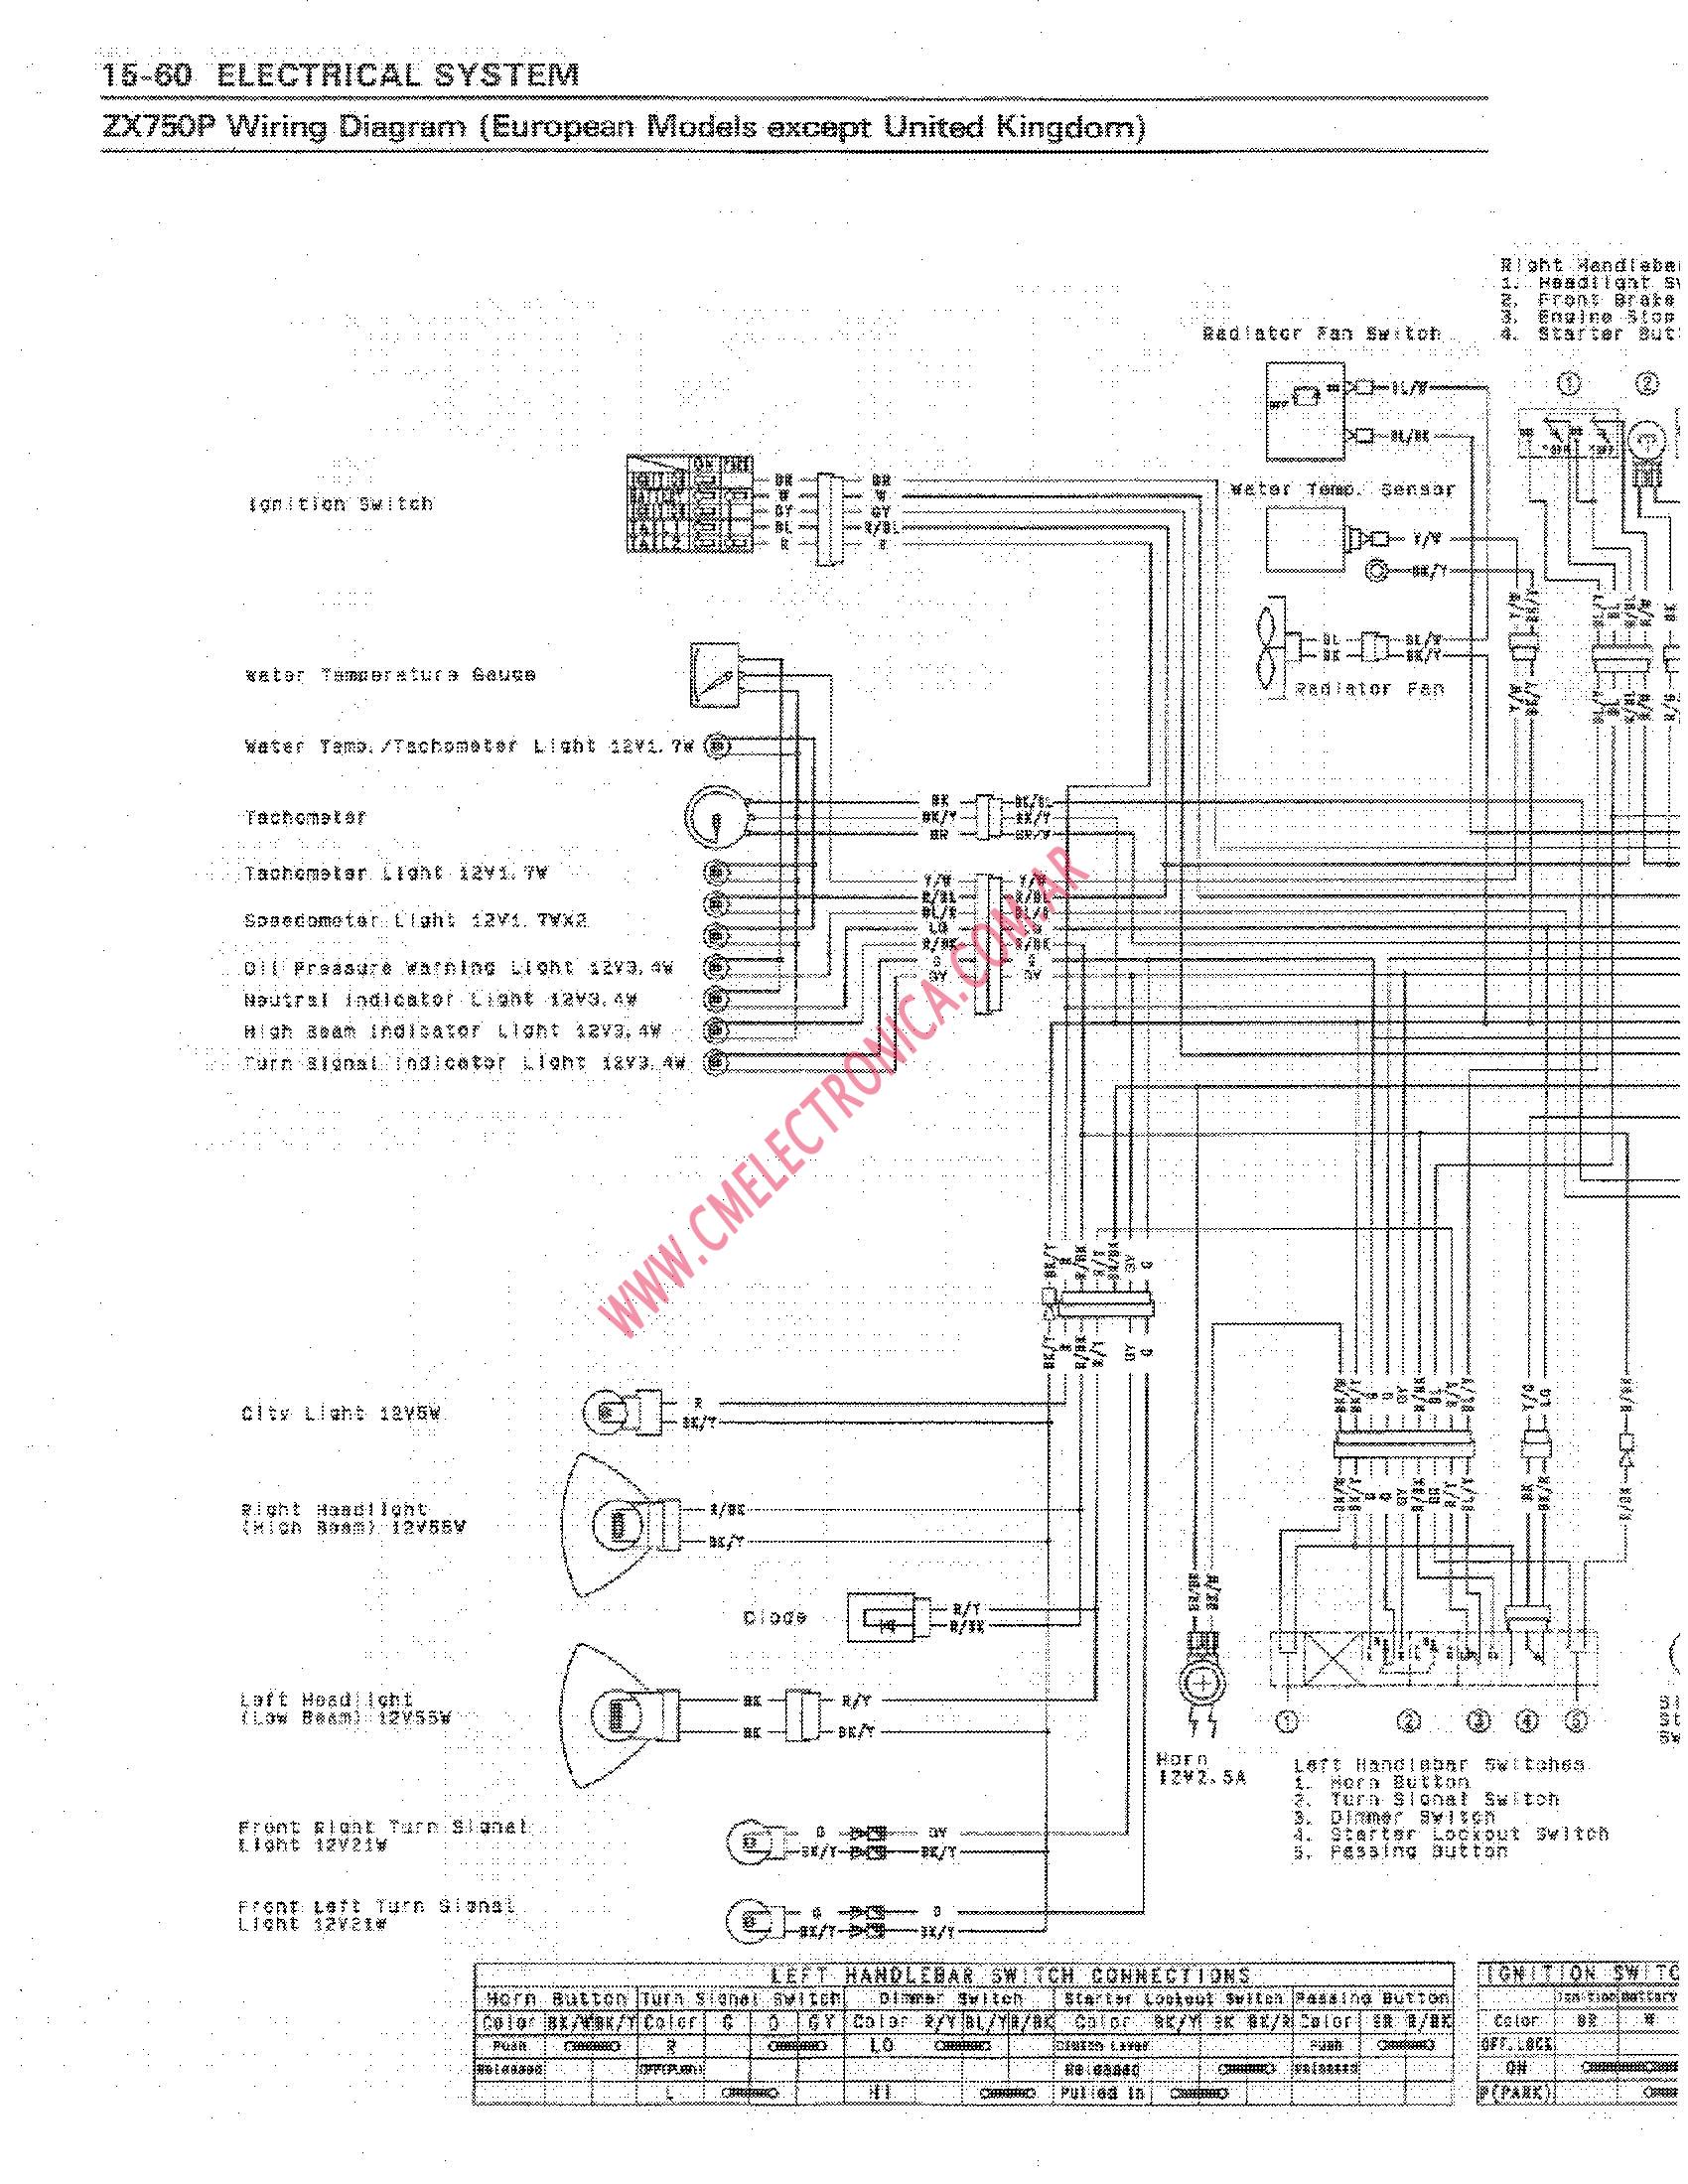 Kawasaki Motorcycle 250Cc Wiring Diagram from www.cmelectronica.com.ar